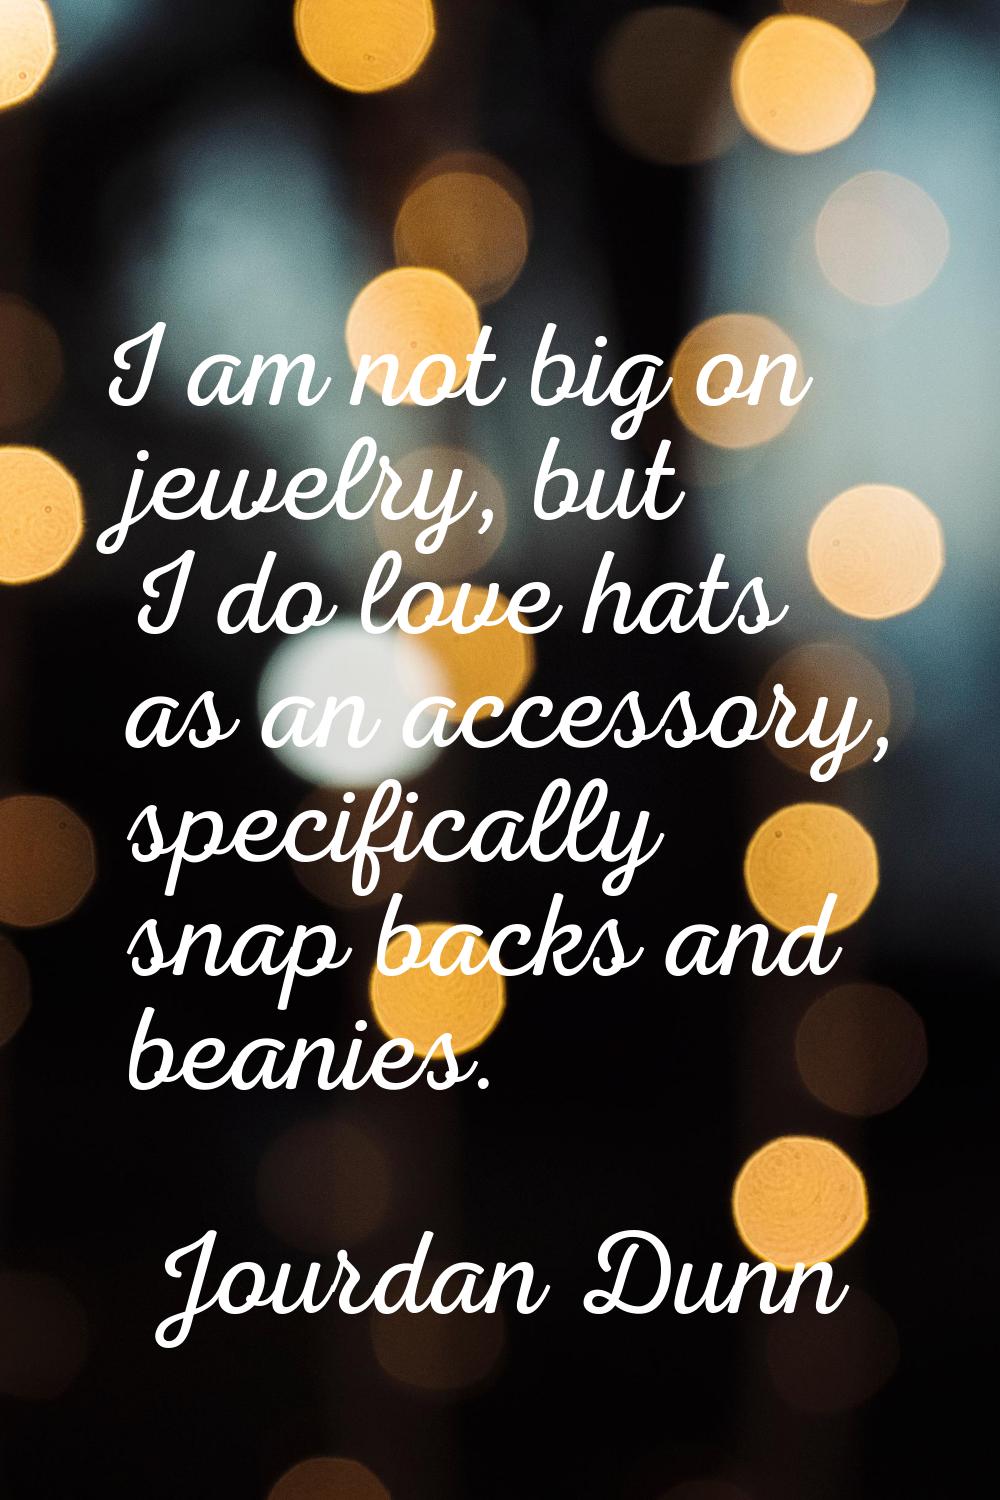 I am not big on jewelry, but I do love hats as an accessory, specifically snap backs and beanies.